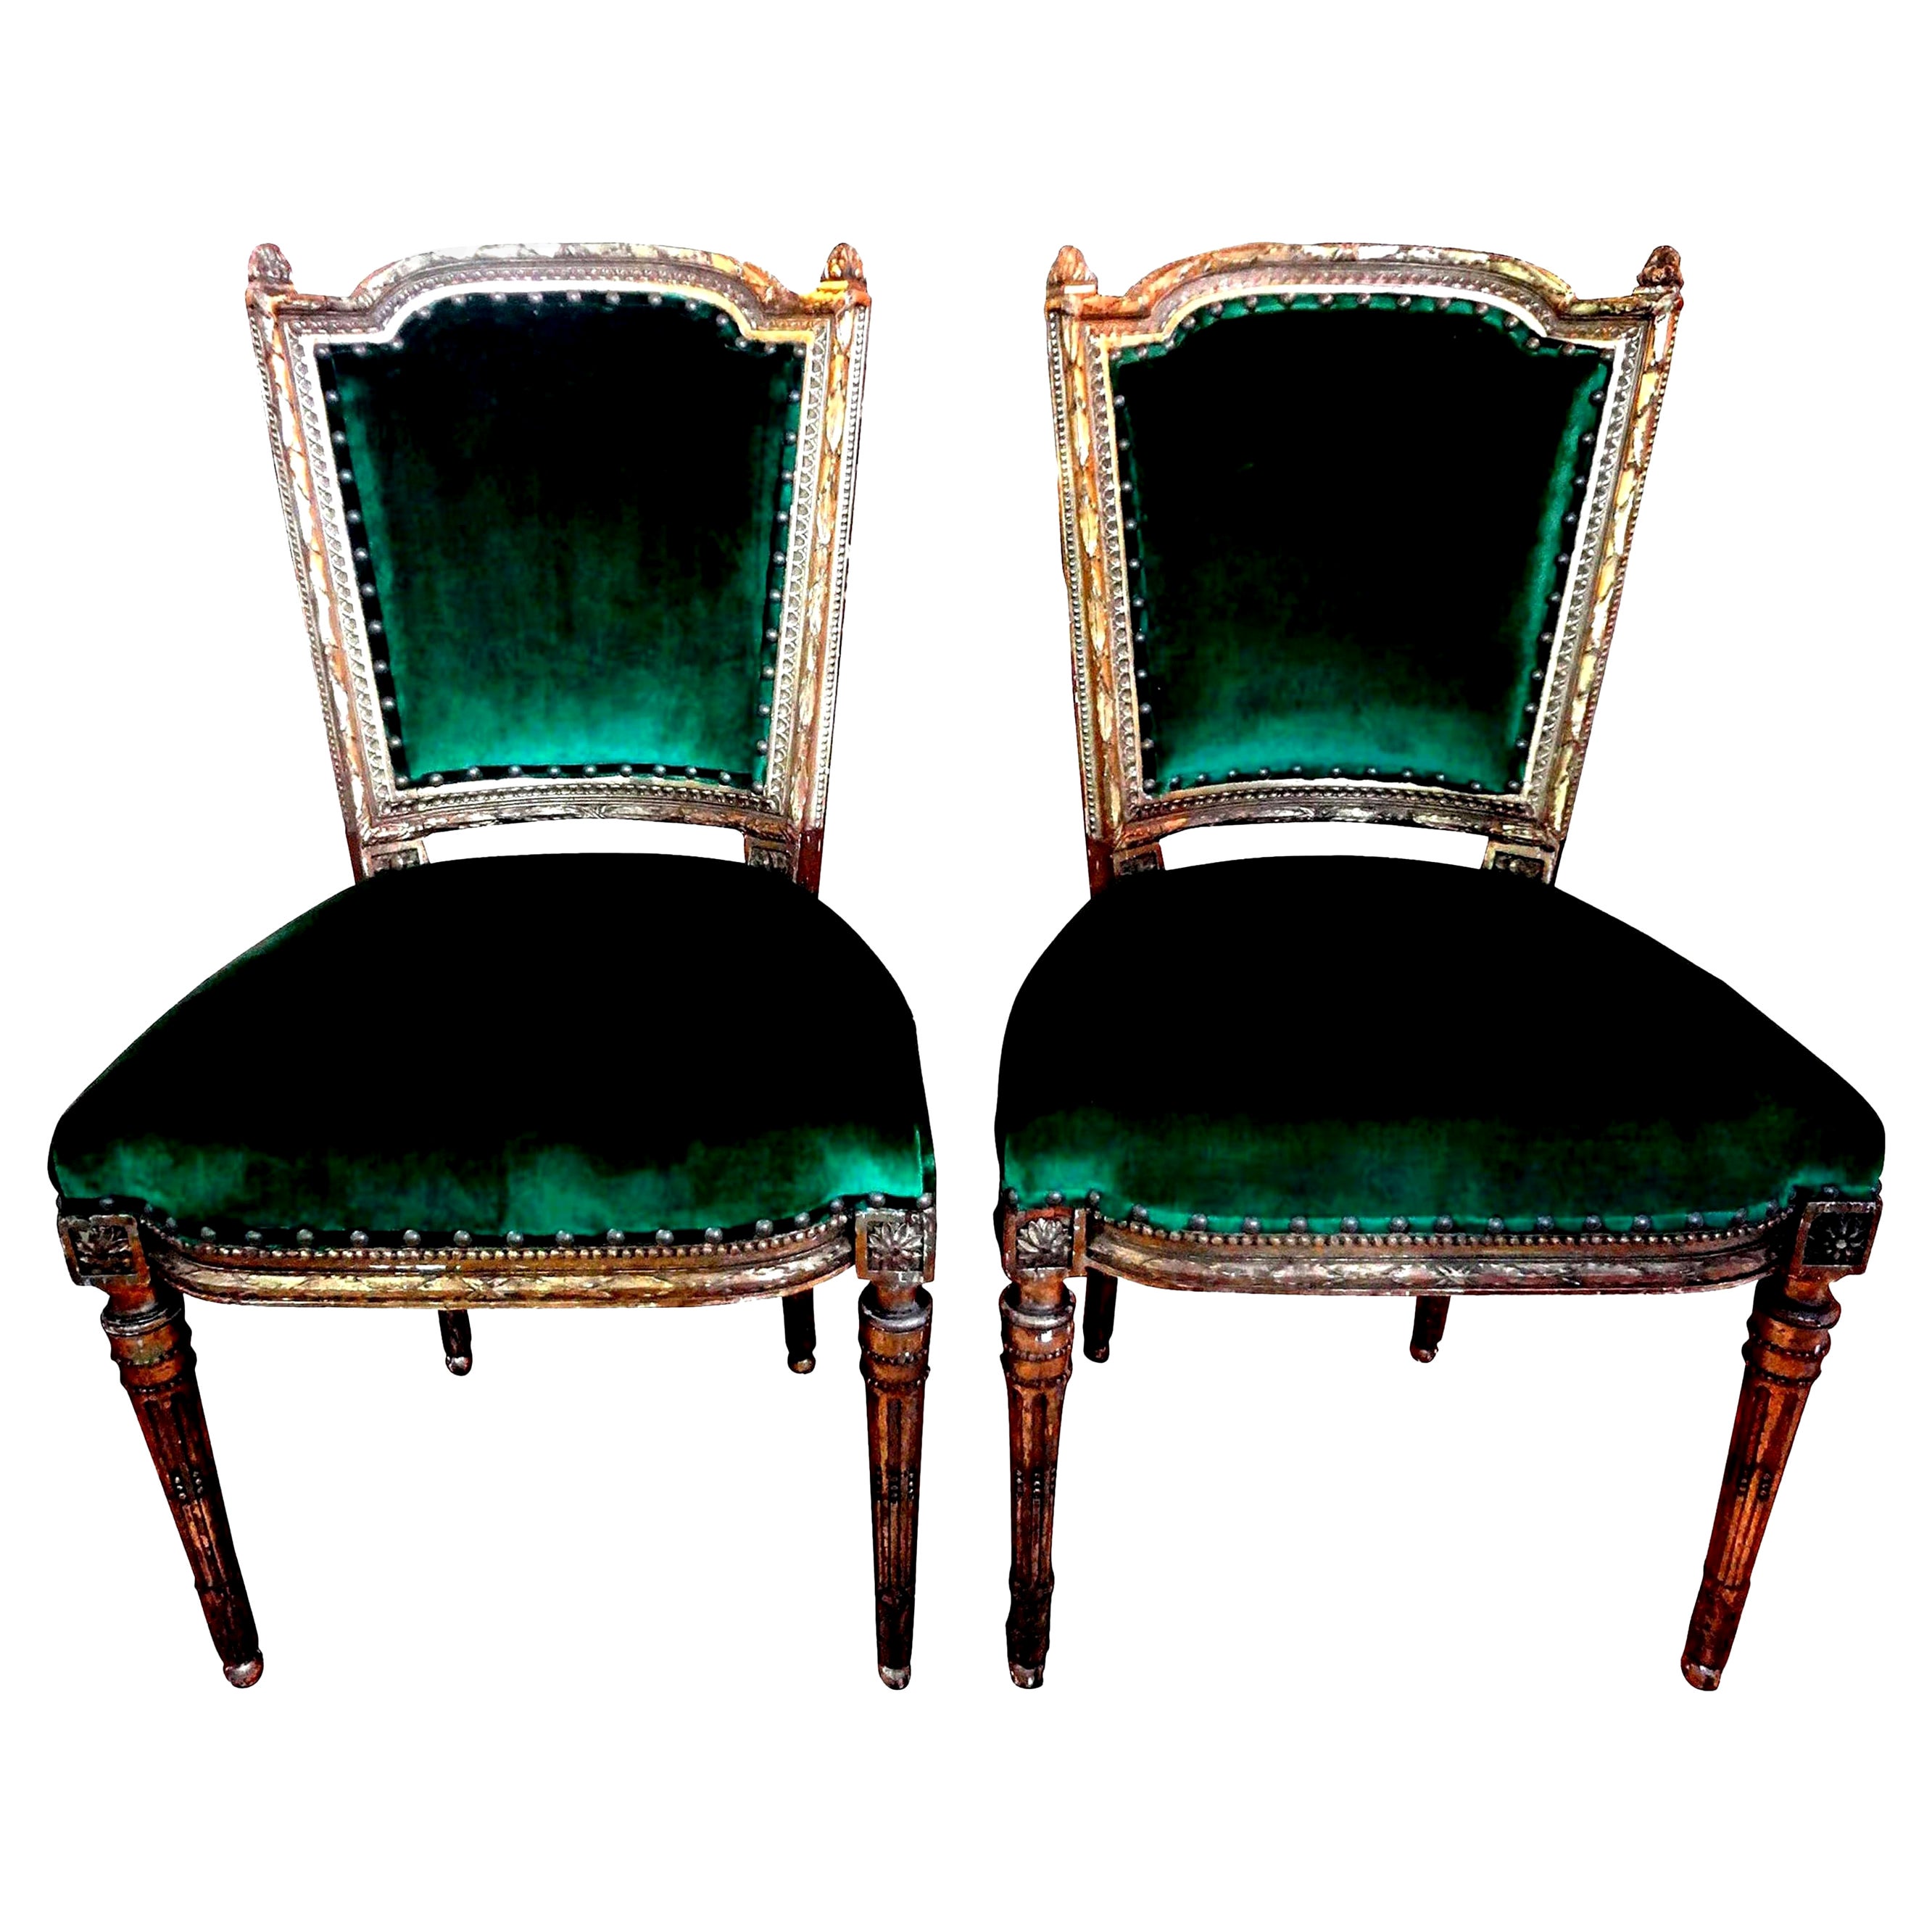 Pair of 19th Century French Louis XVI Style Giltwood Chairs For Sale